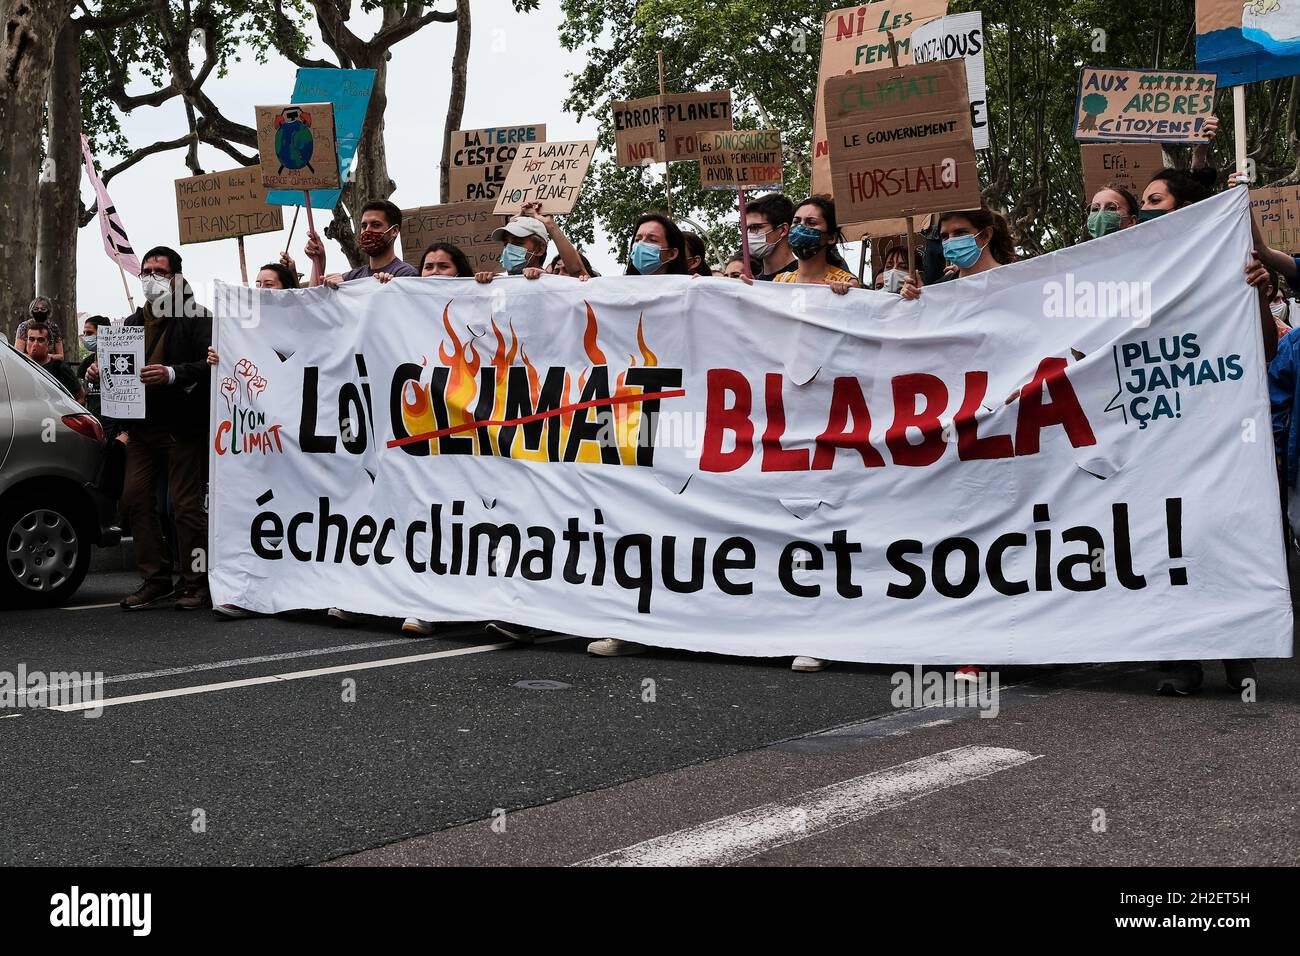 Climate protester holding up a sign at the Climate Change Protest in Lyon France Stock Photo